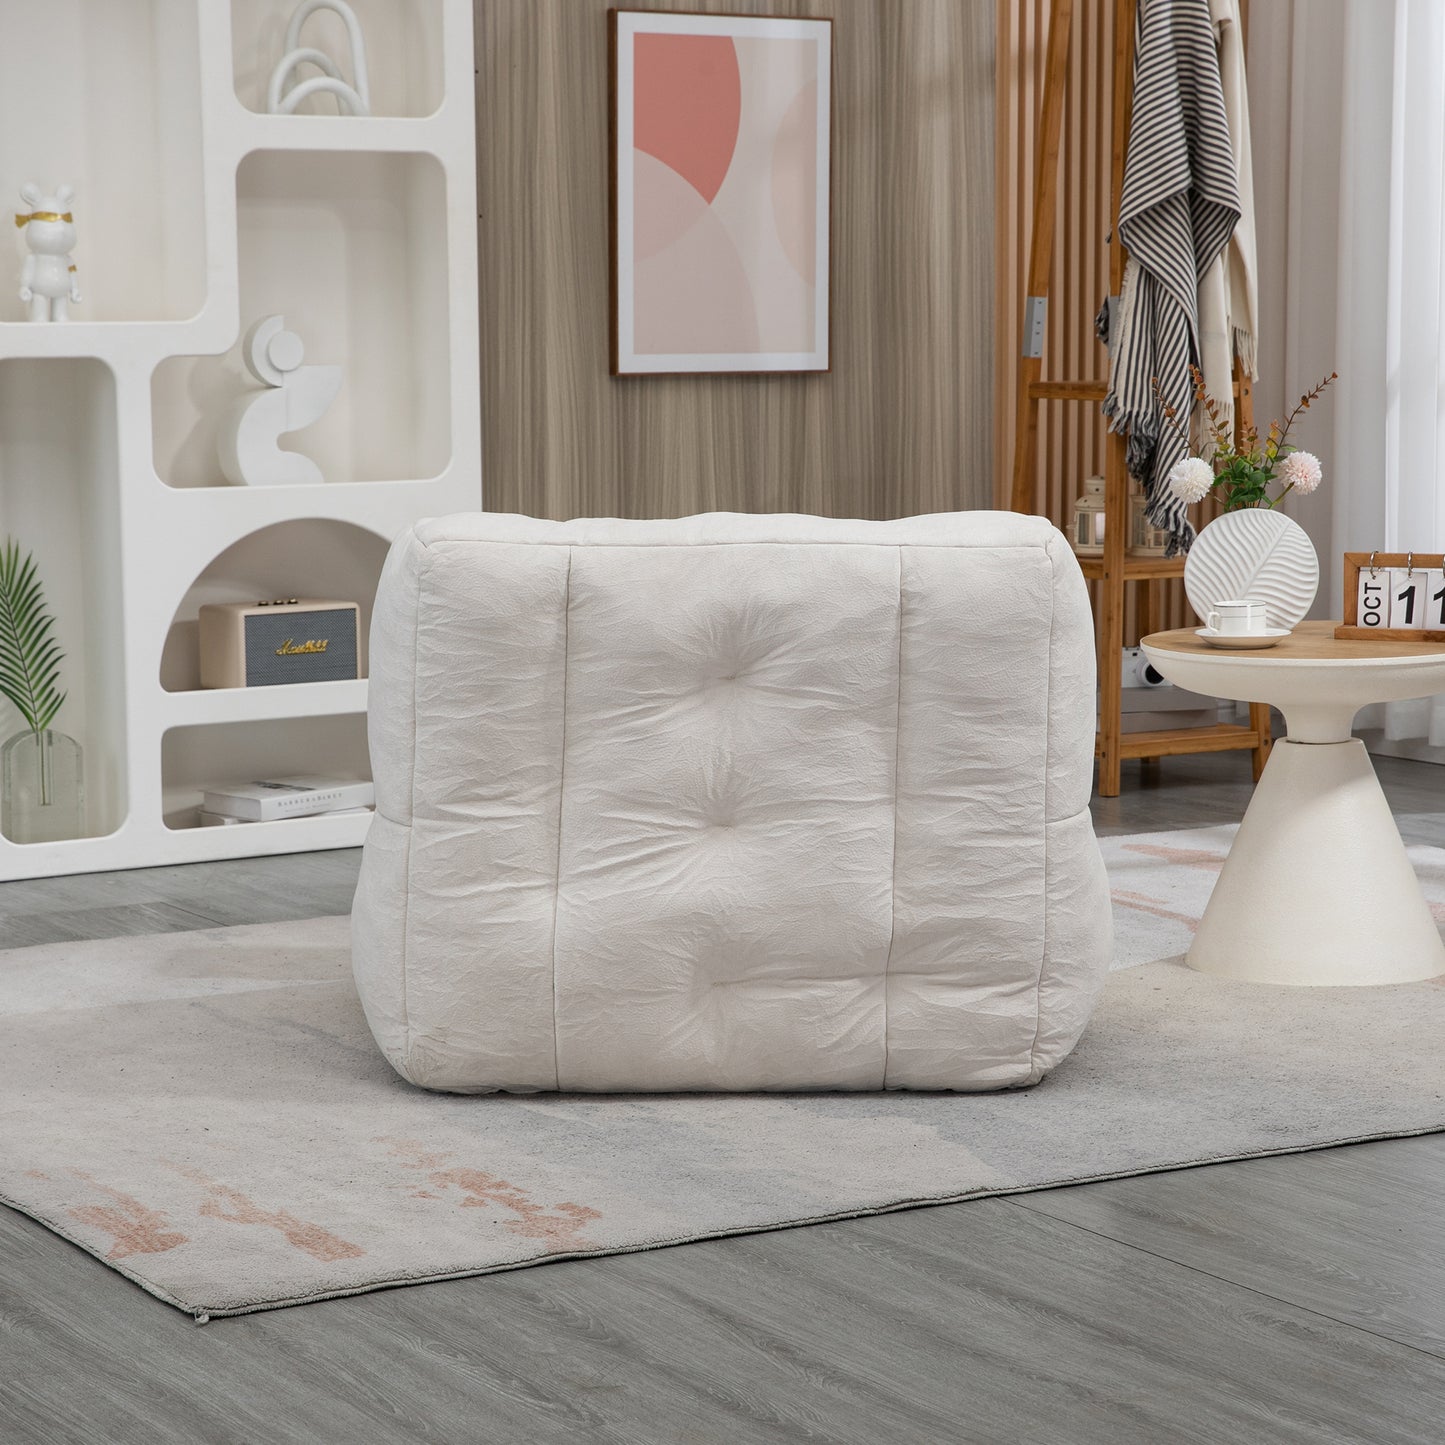 Fluffy bean bag chair, comfortable bean bag for adults and children, super soft lazy sofa chair with memory foam and ottoman, indoor modern focus bean bag chair for living room, bedroom, apartment